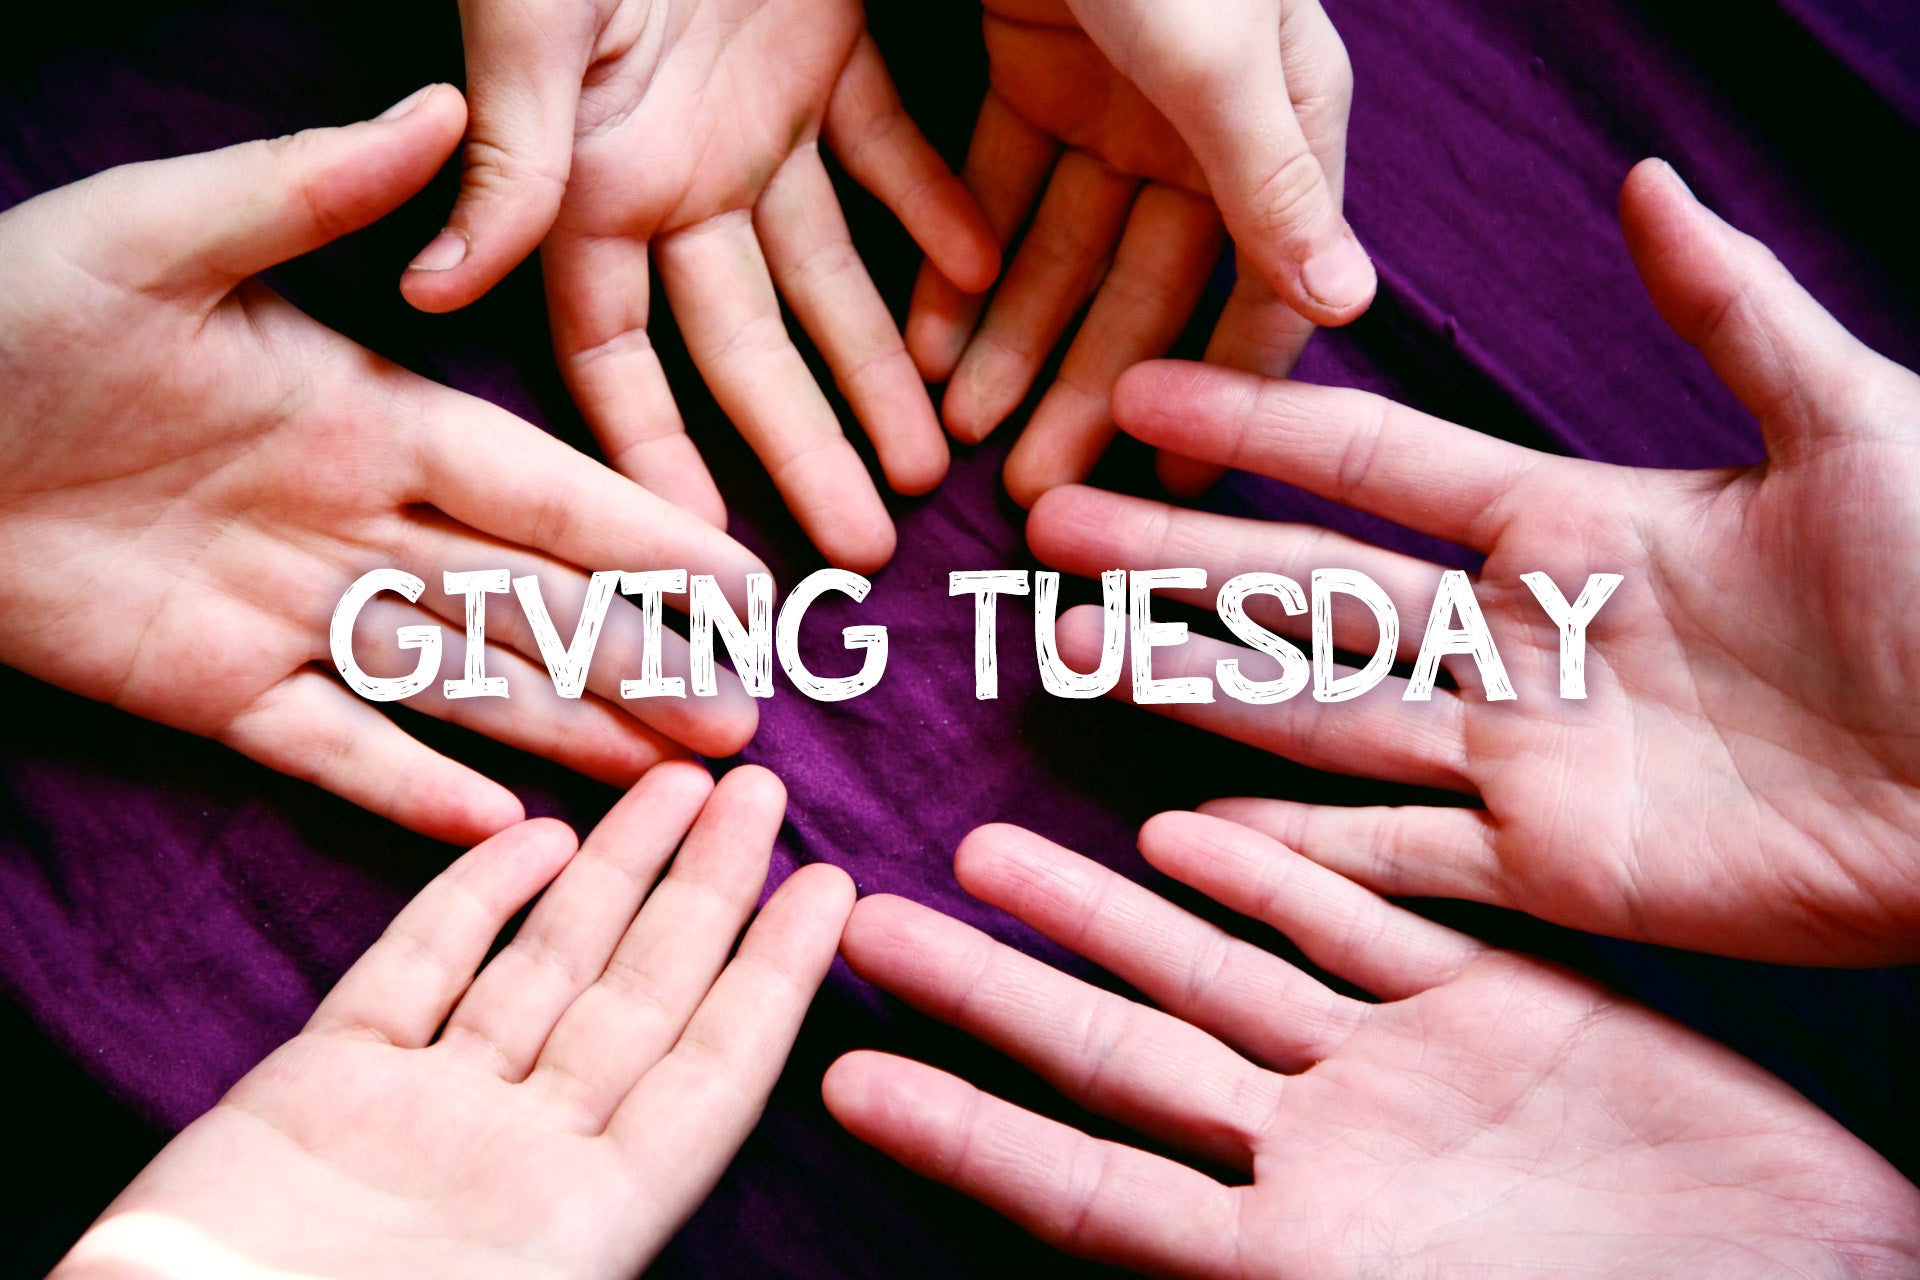 Seven Organizations to Support This GivingTuesday